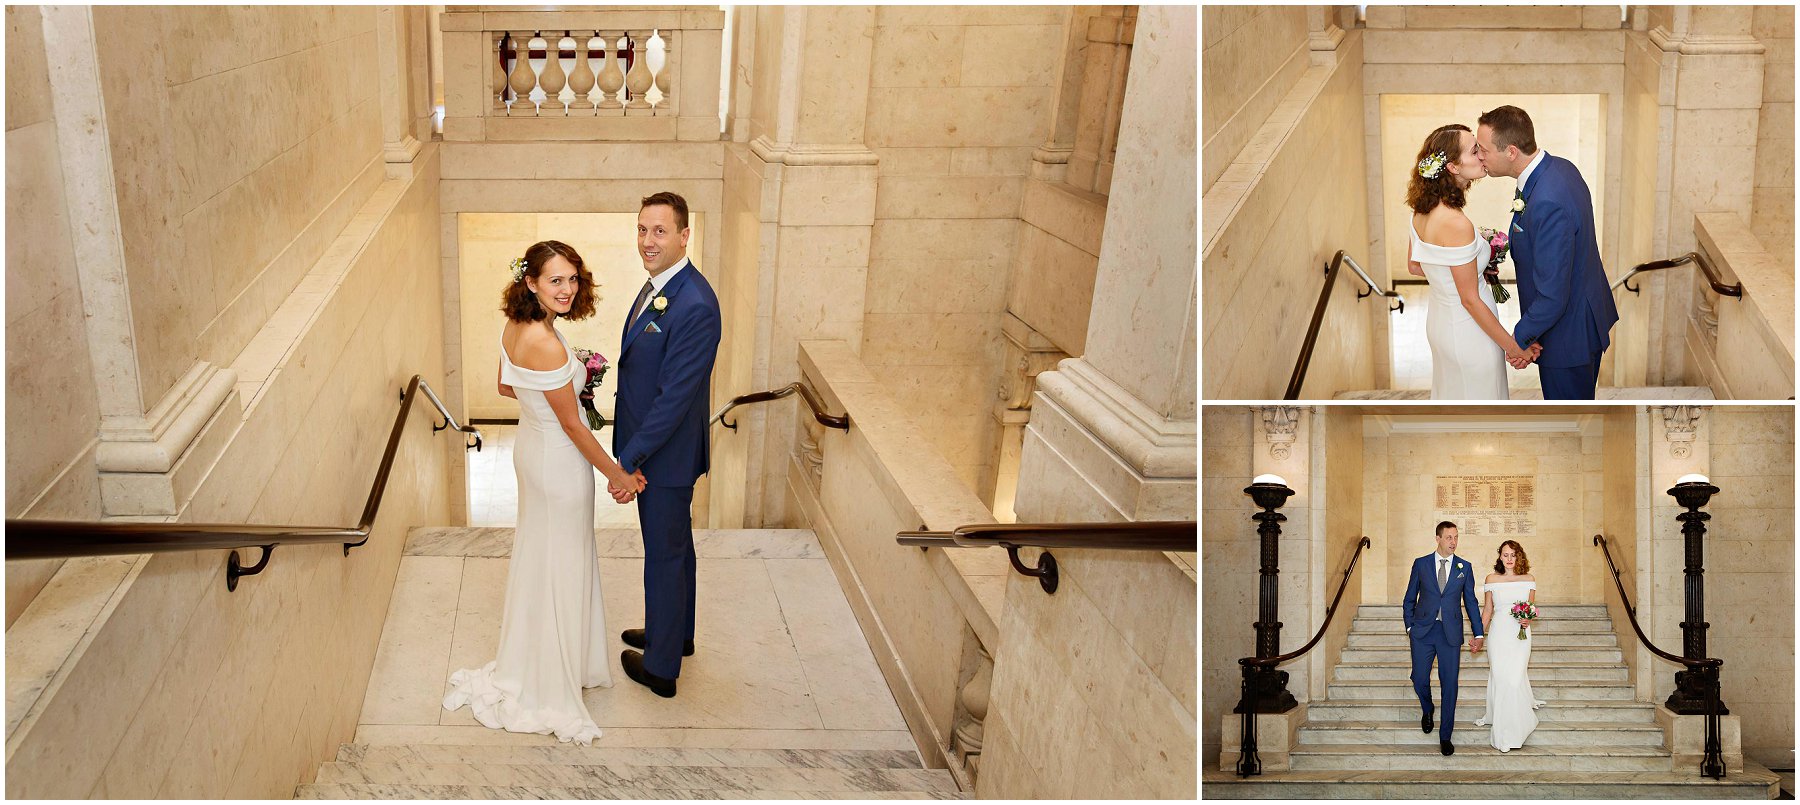 Wedding Portraits in the Old Marylebone Town Hall by YBPHOTOGRAPHIC